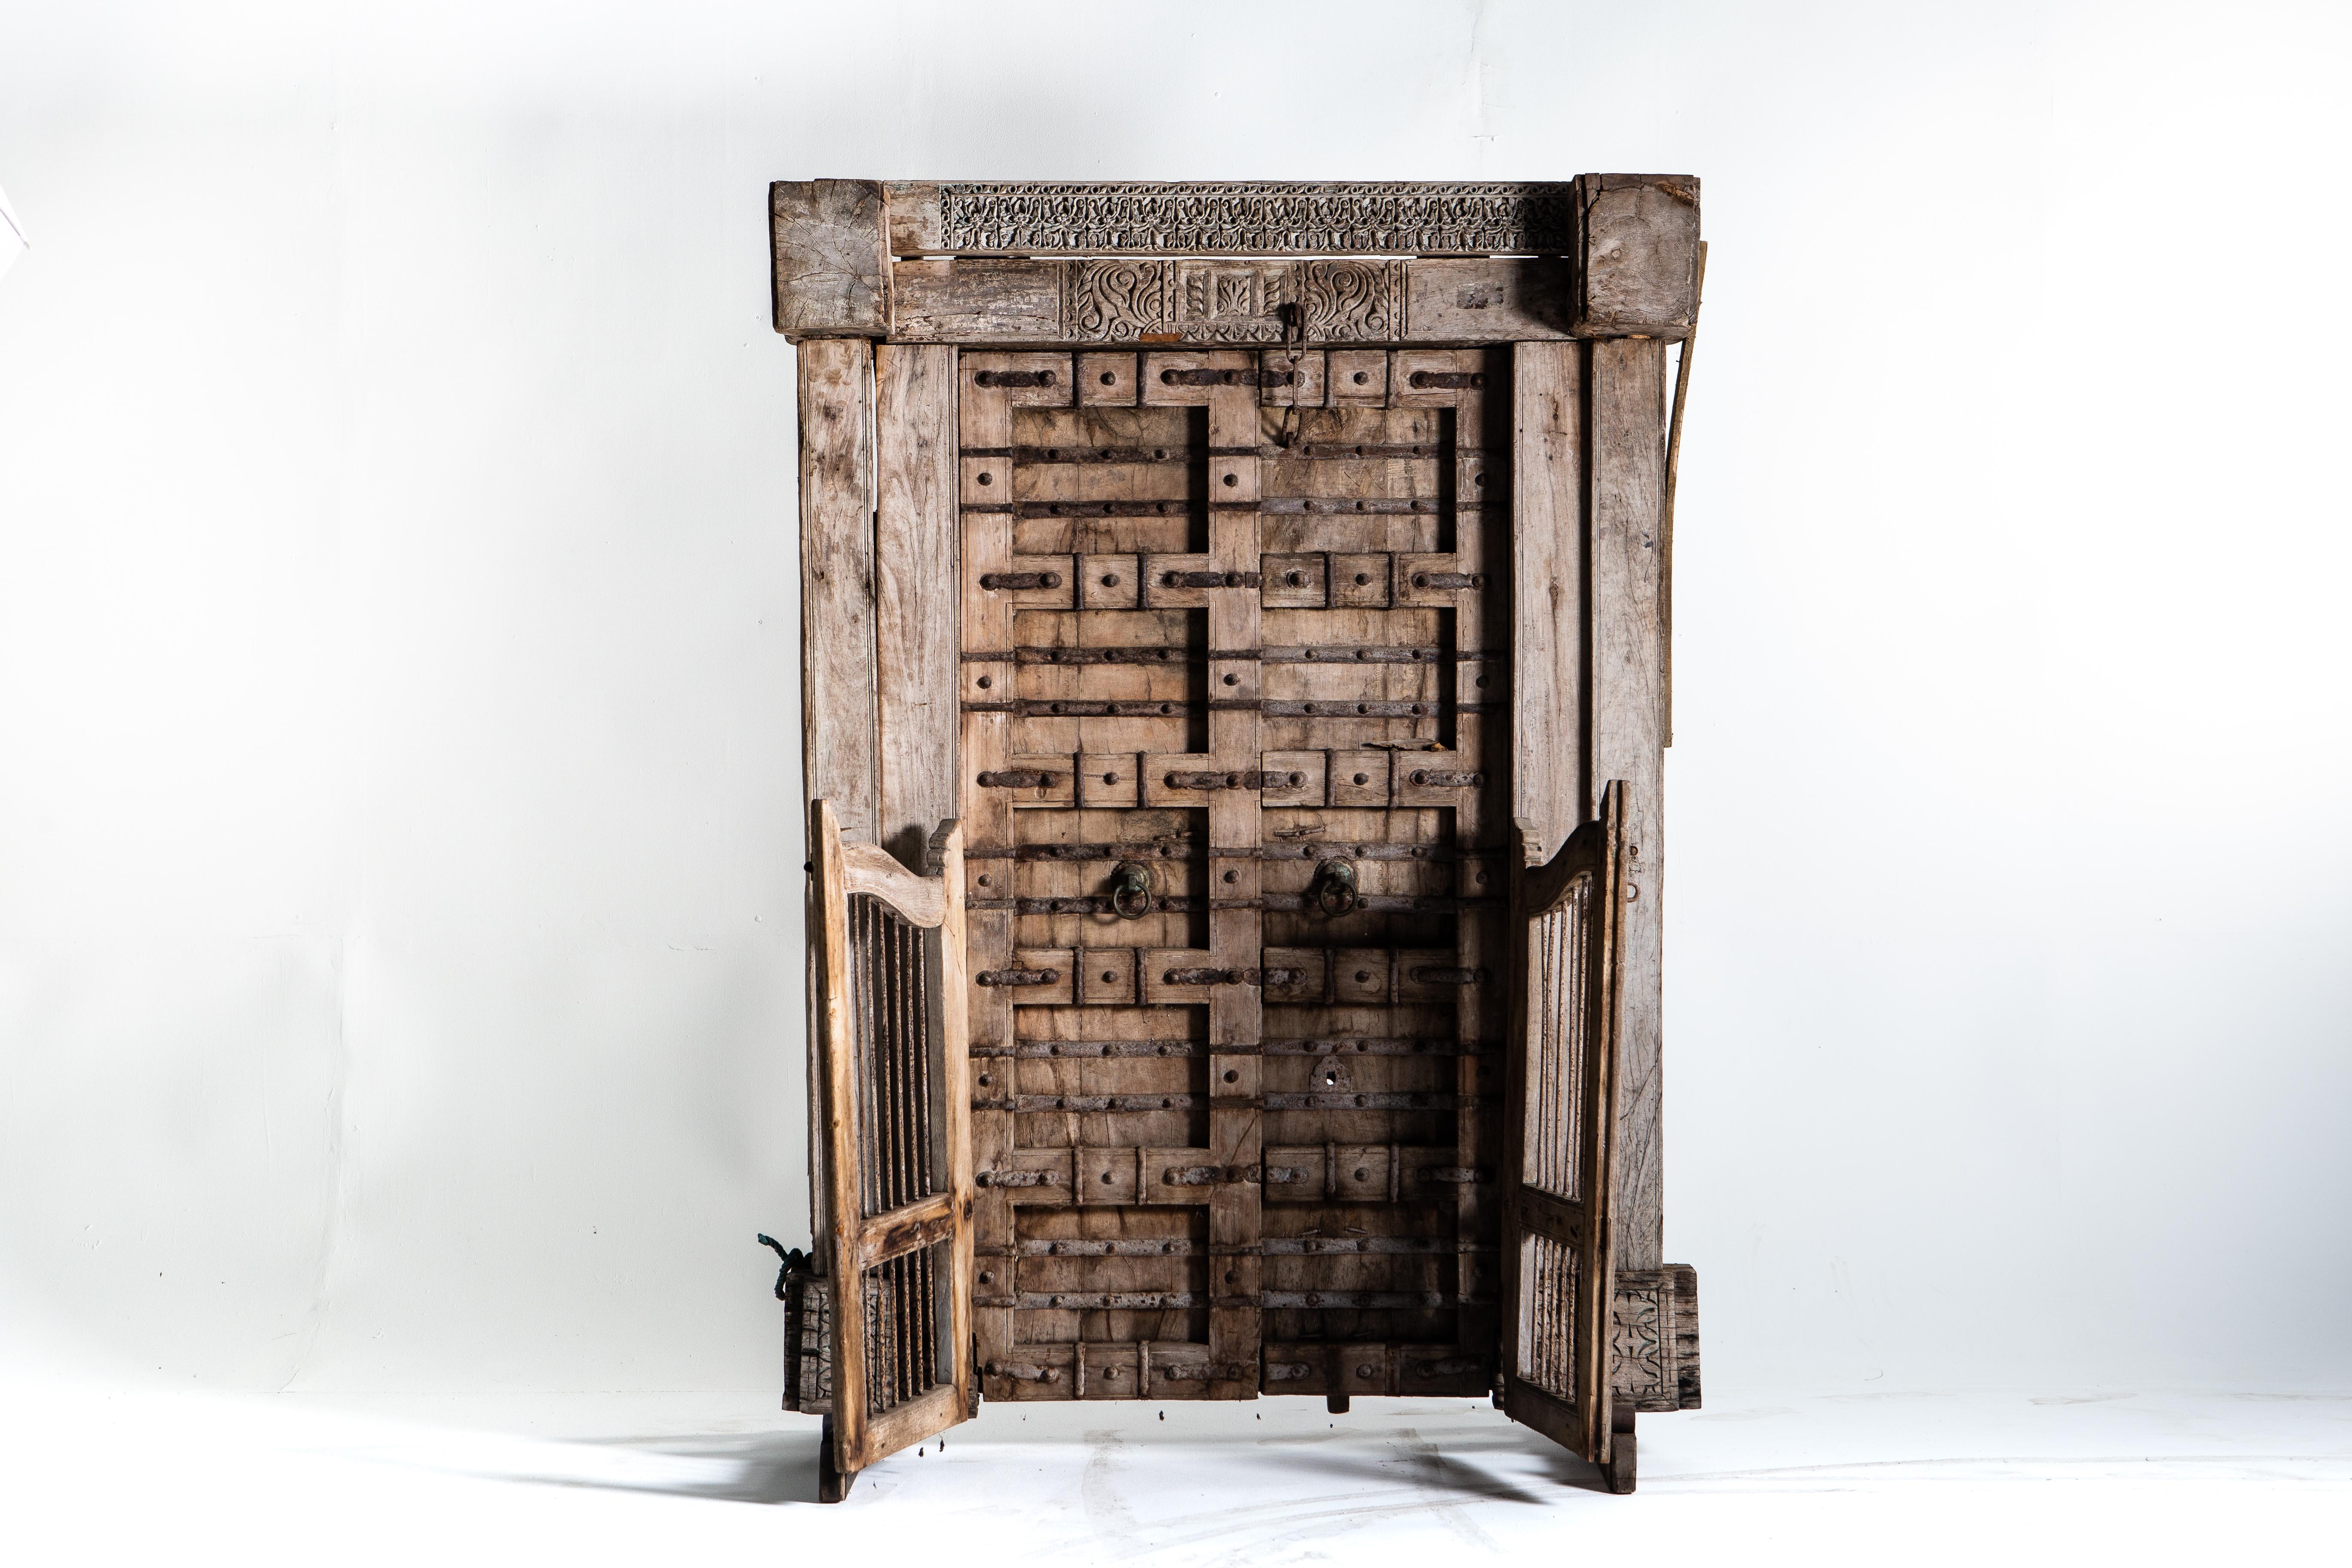 This complete entryway is as handsome as it is imposing. Delicate carvings are featured at the top and bottom of the frame. The two main doors are highly reinforced with heavy beans and hand forged iron straps. The open inward and are secured with a